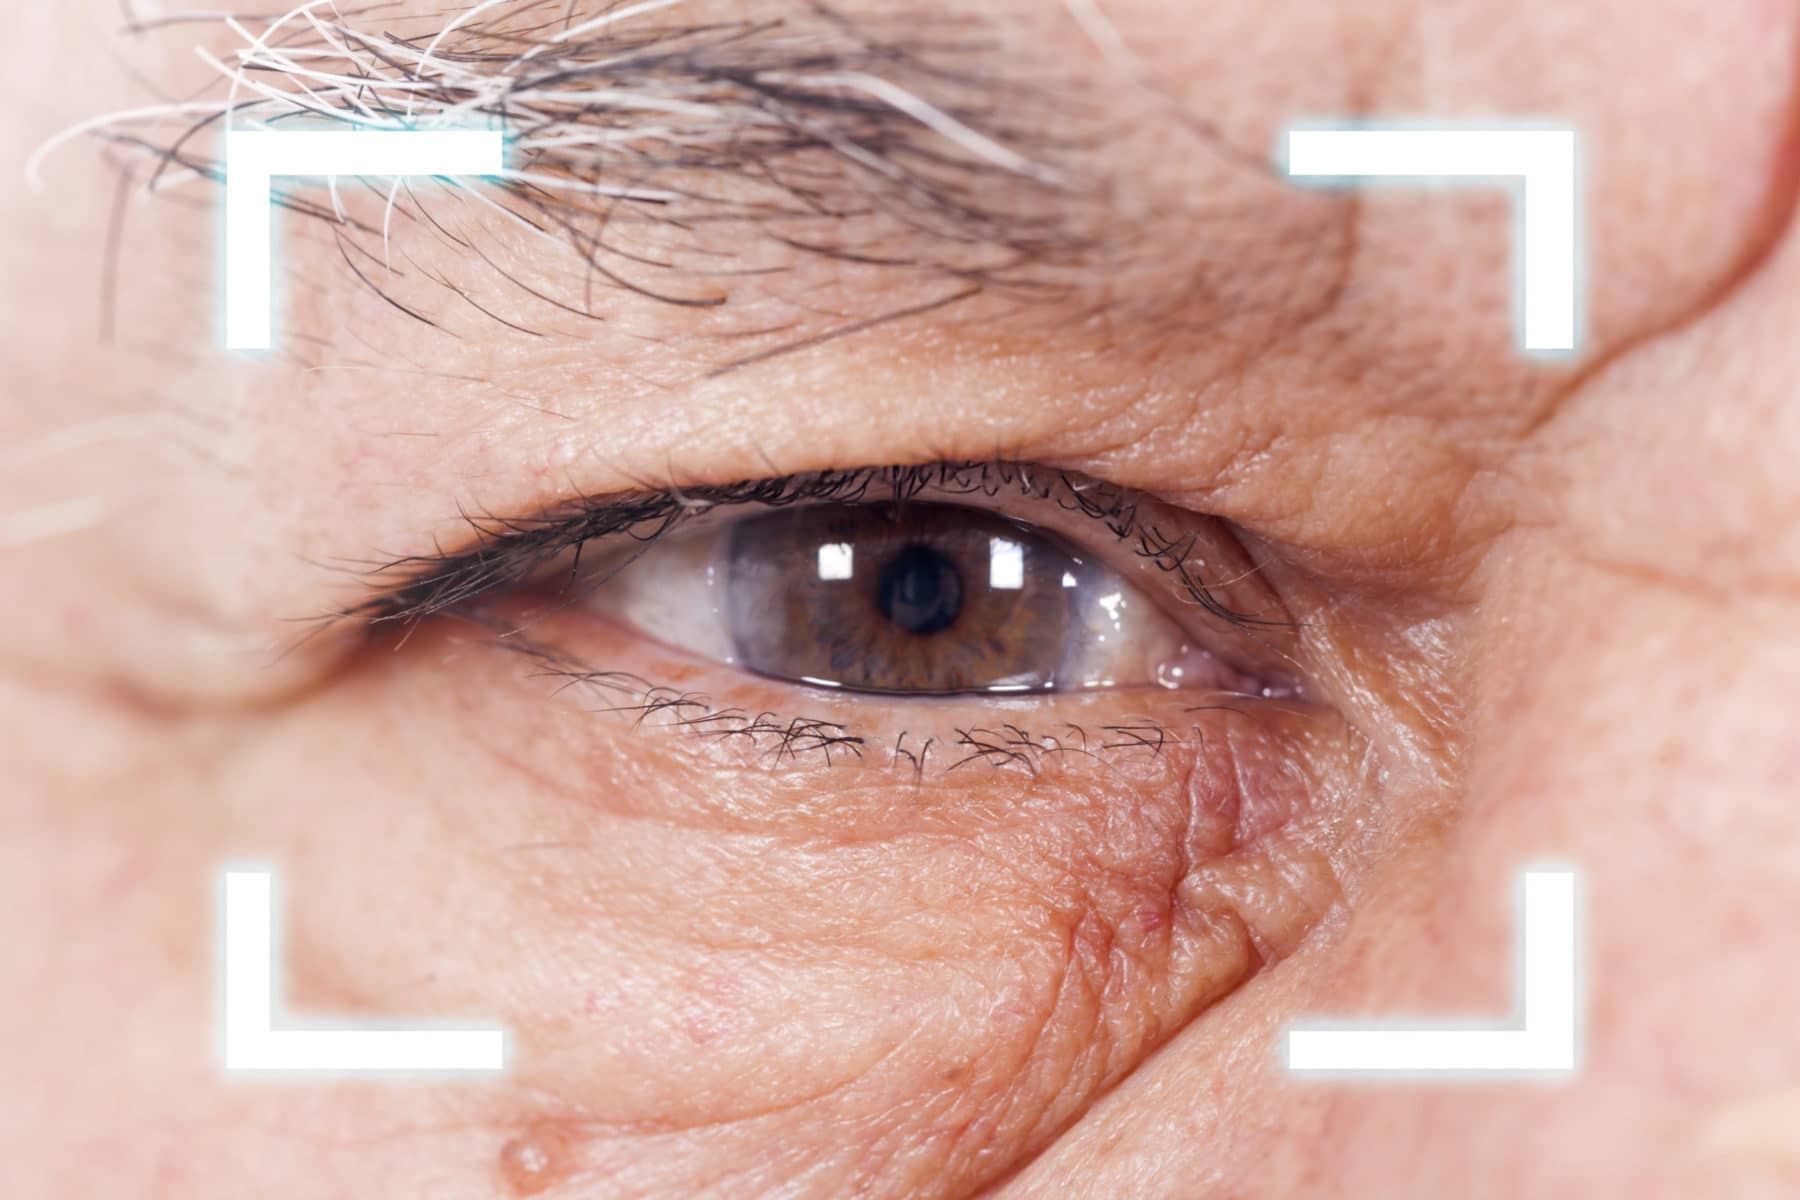 Refractive Cataract Surgery FAQ: The natural lens is replaced with an advanced multifocal lens rather than a standard synthetic lens in order to correct your vision. Refractive cataract surgery can correct shortsightedness, farsightedness, and astigmatism.